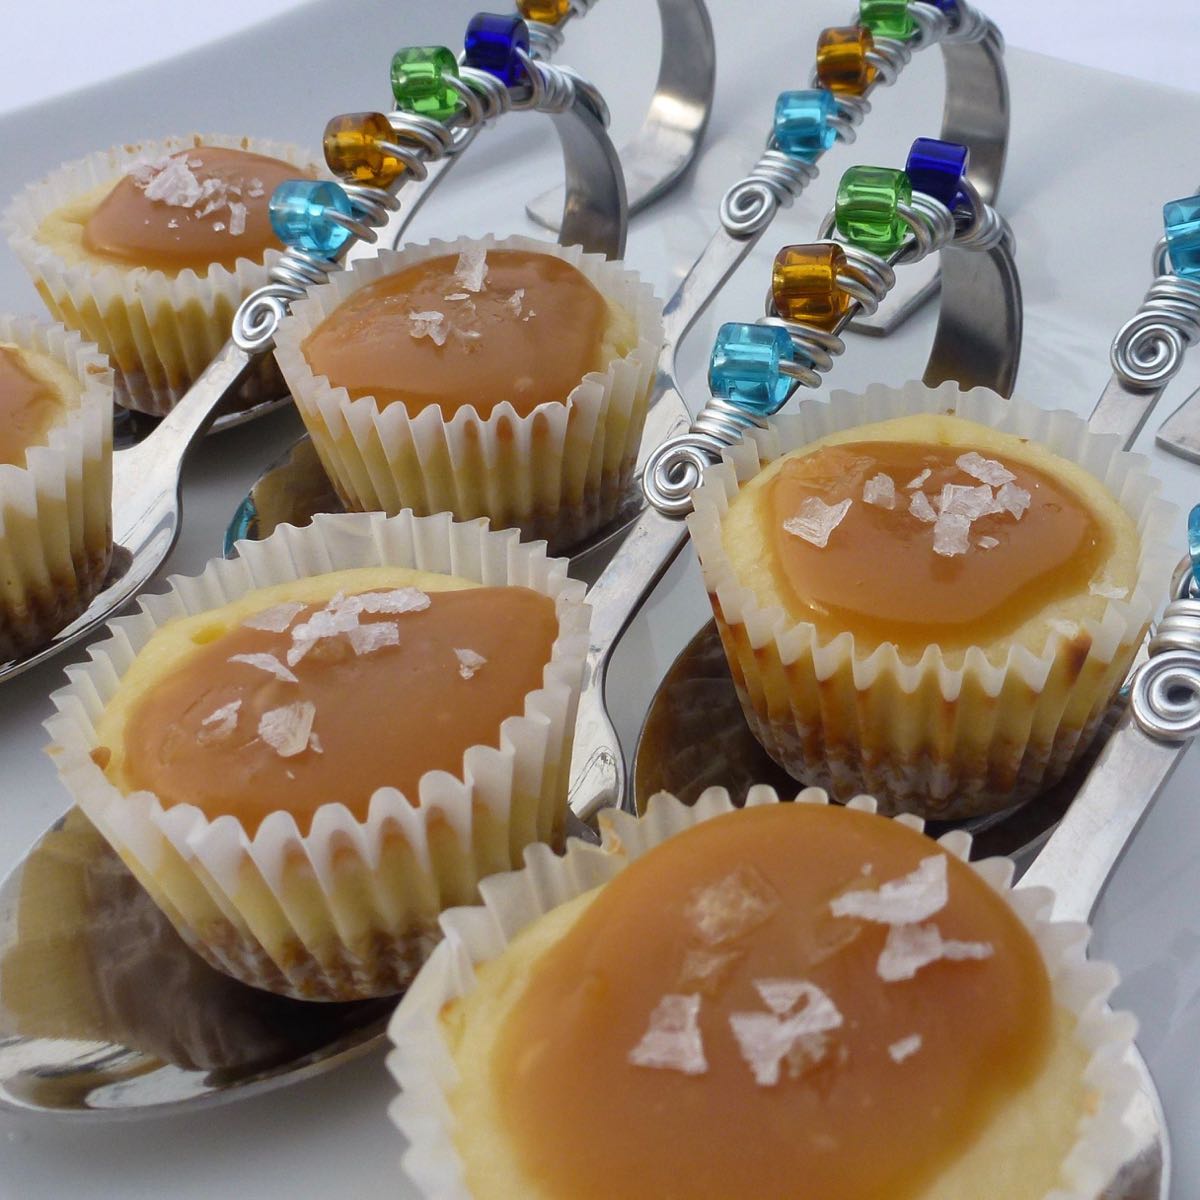 Salted Caramel Cheesecake Cupcakes served on fancy spoons with colourful beaded handles.